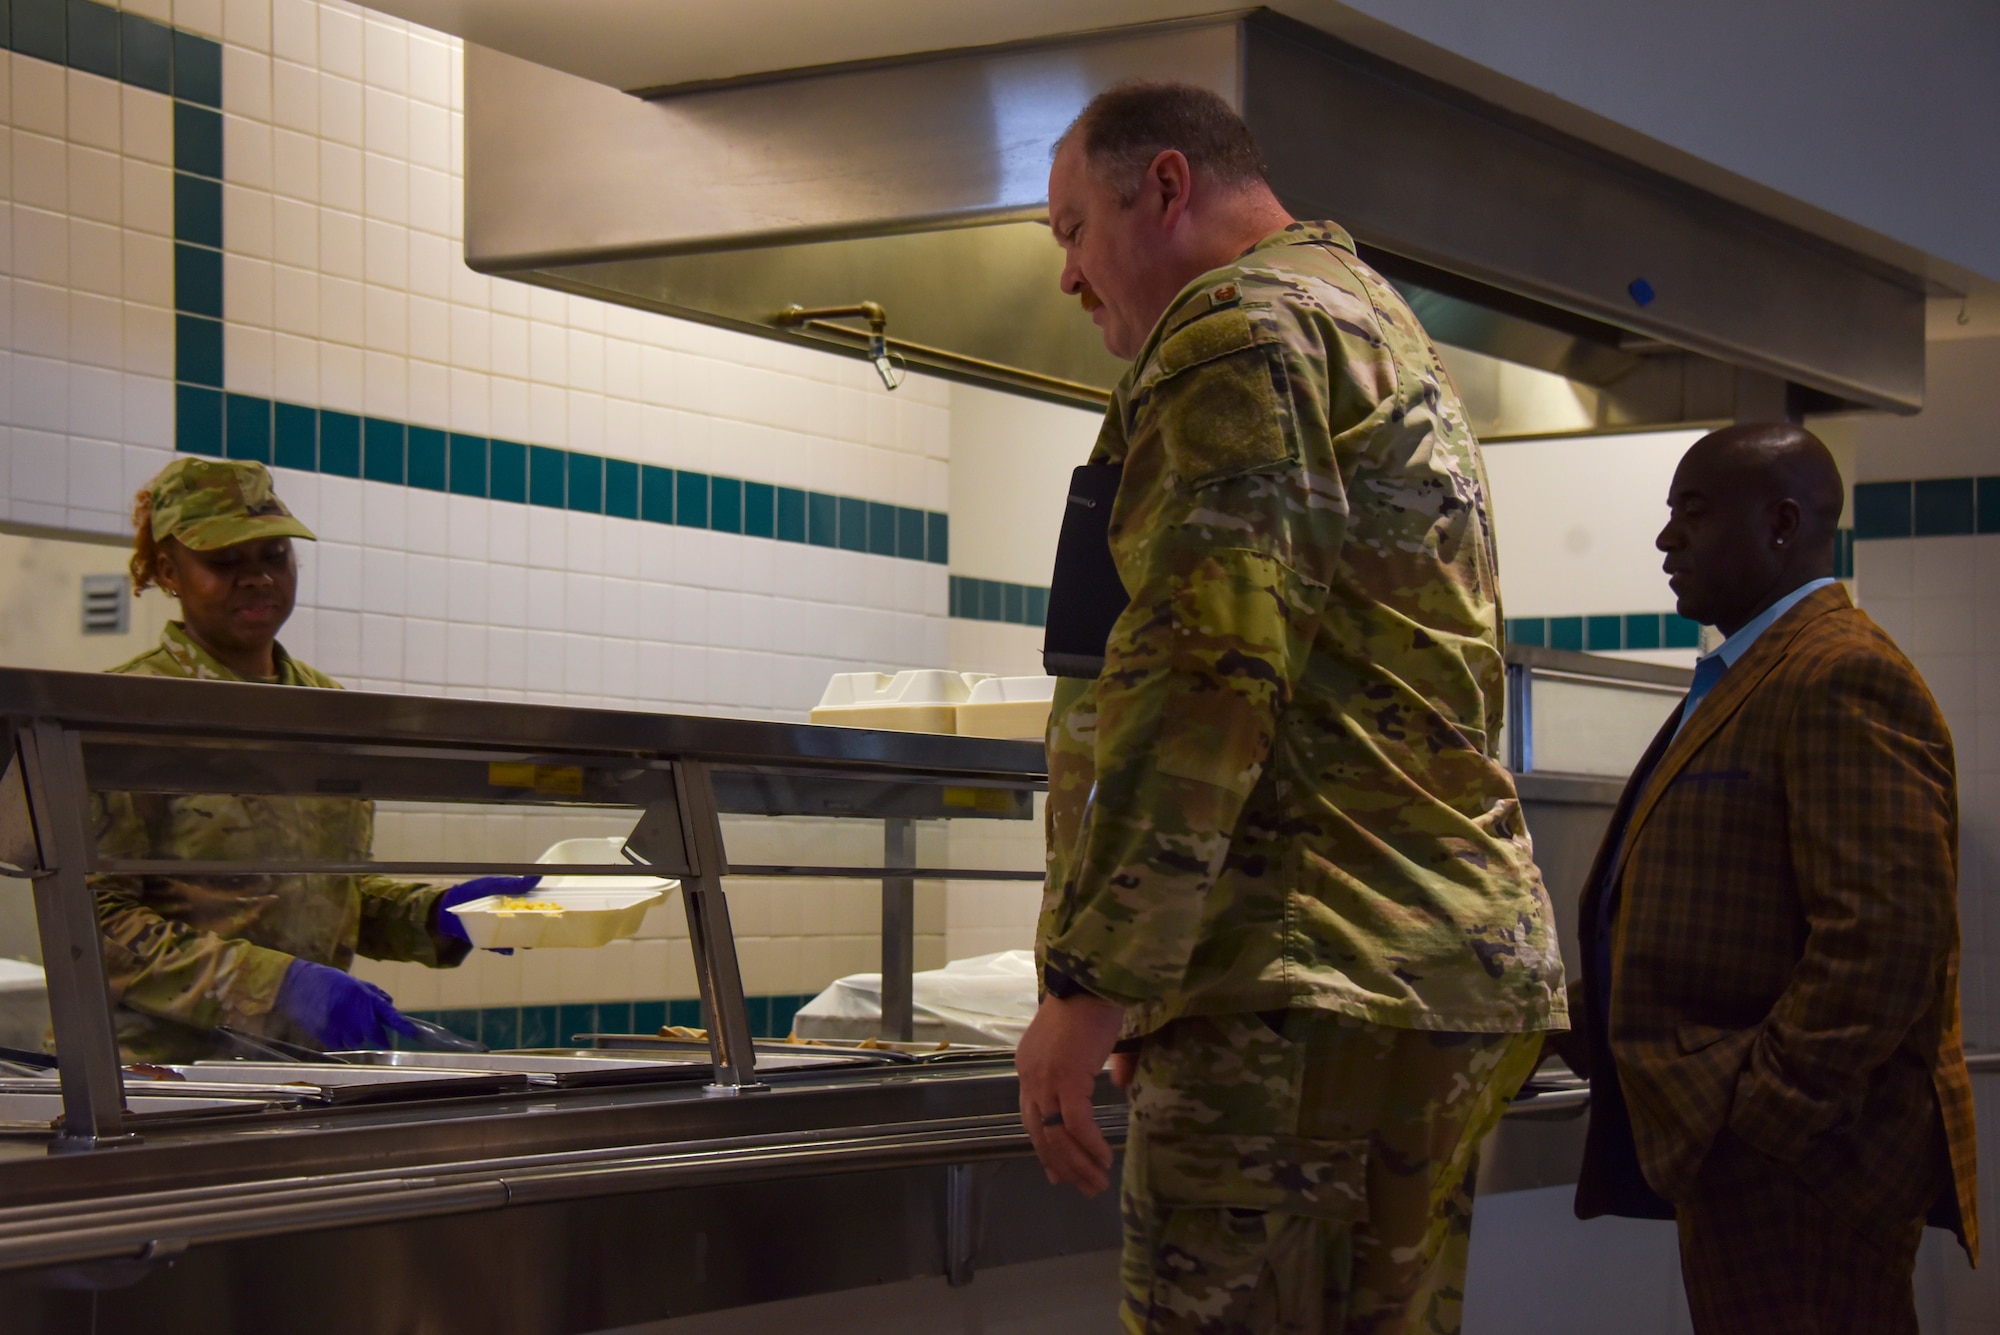 A military member serves food to people.